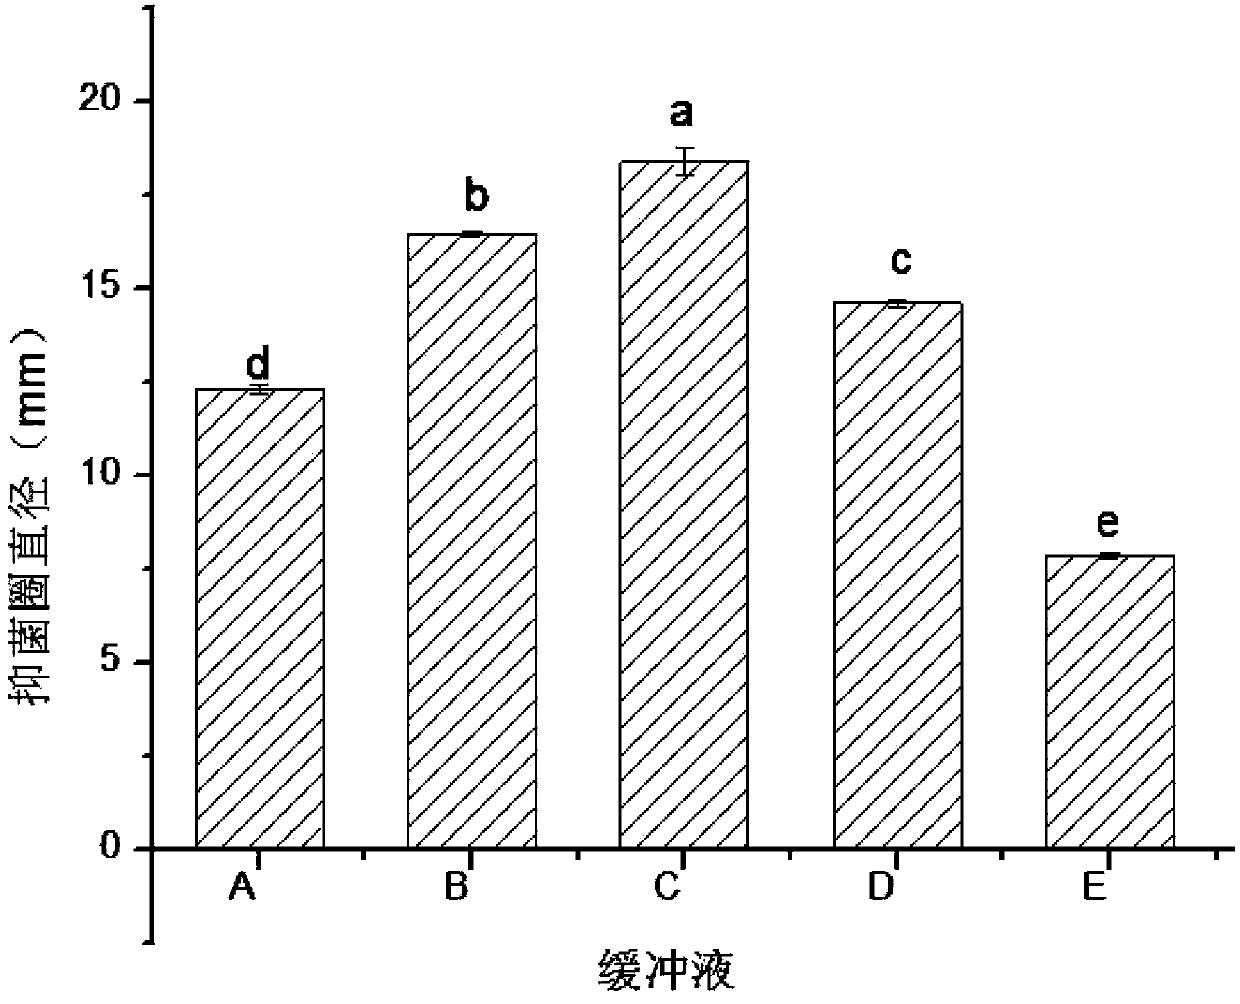 Chili antibacterial peptide extraction and purification method